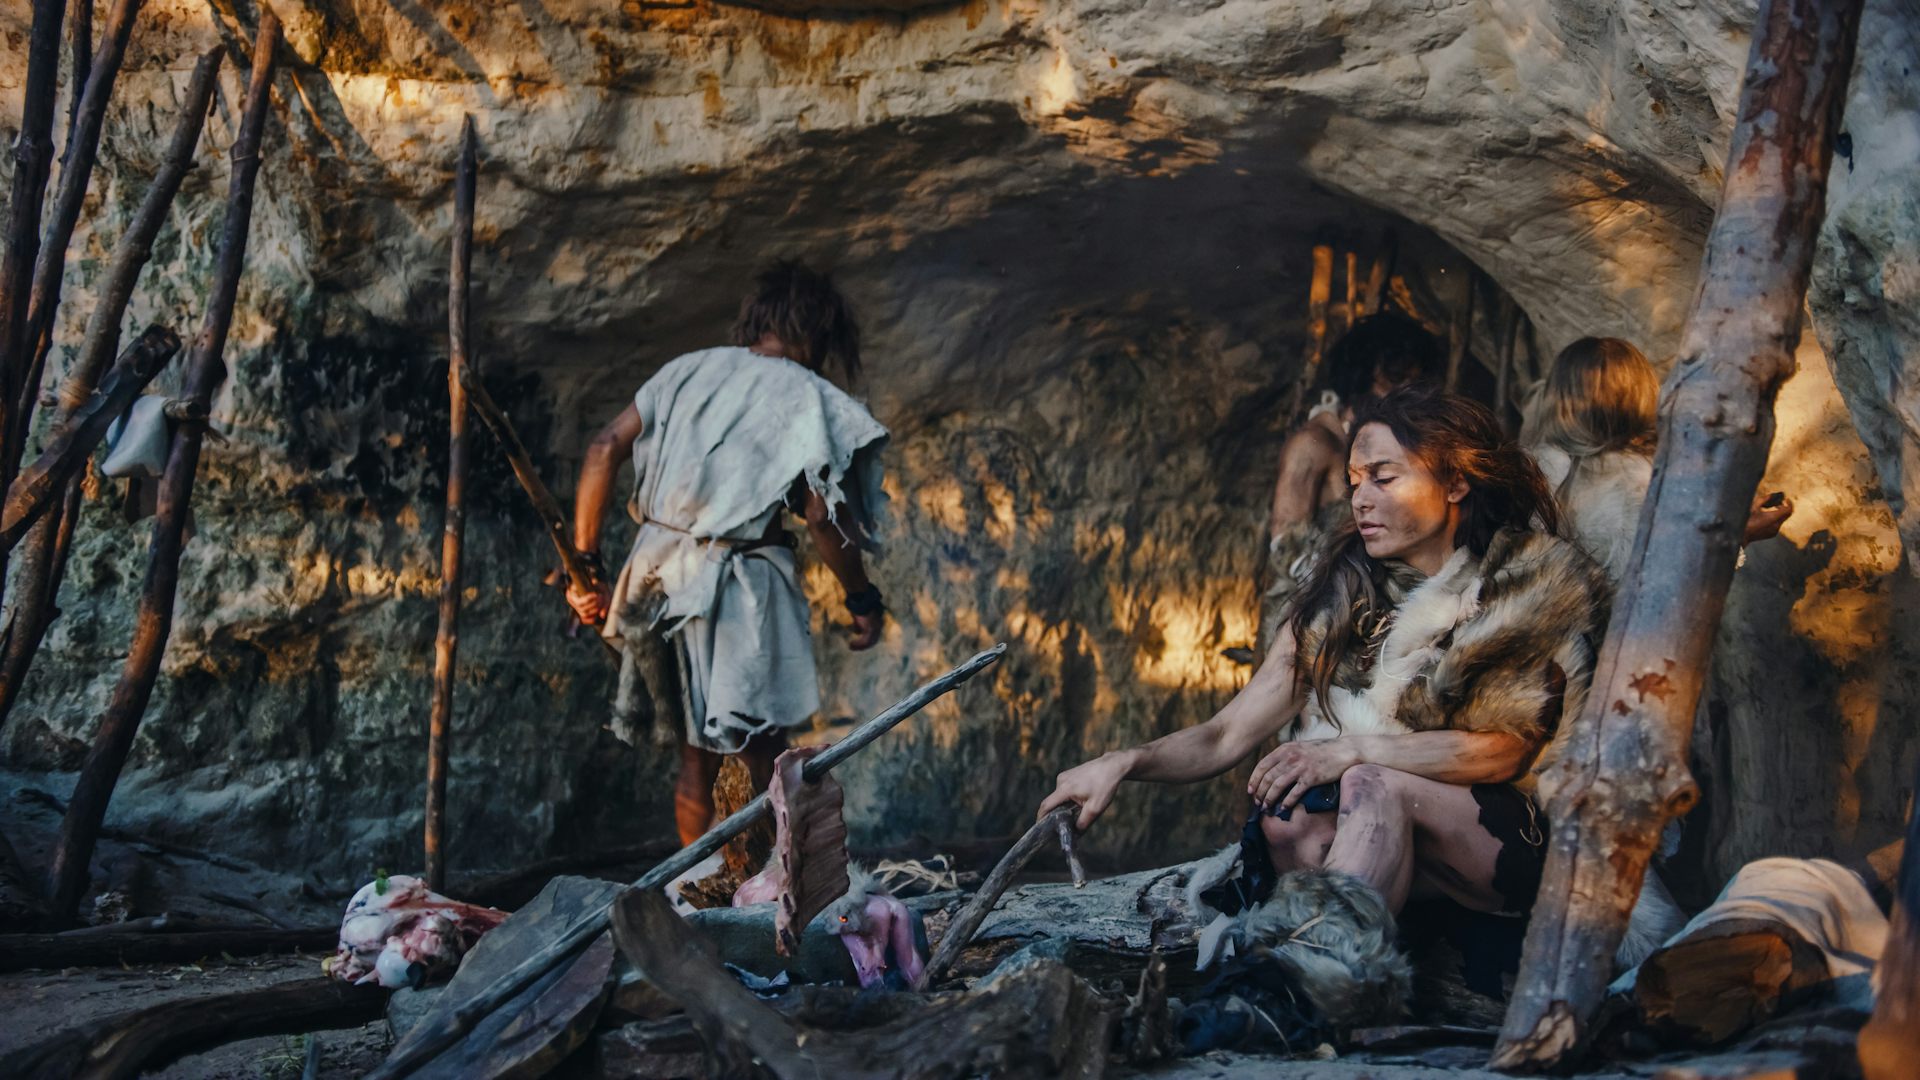 Forget ‘Man the Hunter’ – Physiological and Archaeological Evidence Rewrites Assumptions About a Gendered Division of Labor in Prehistoric Times